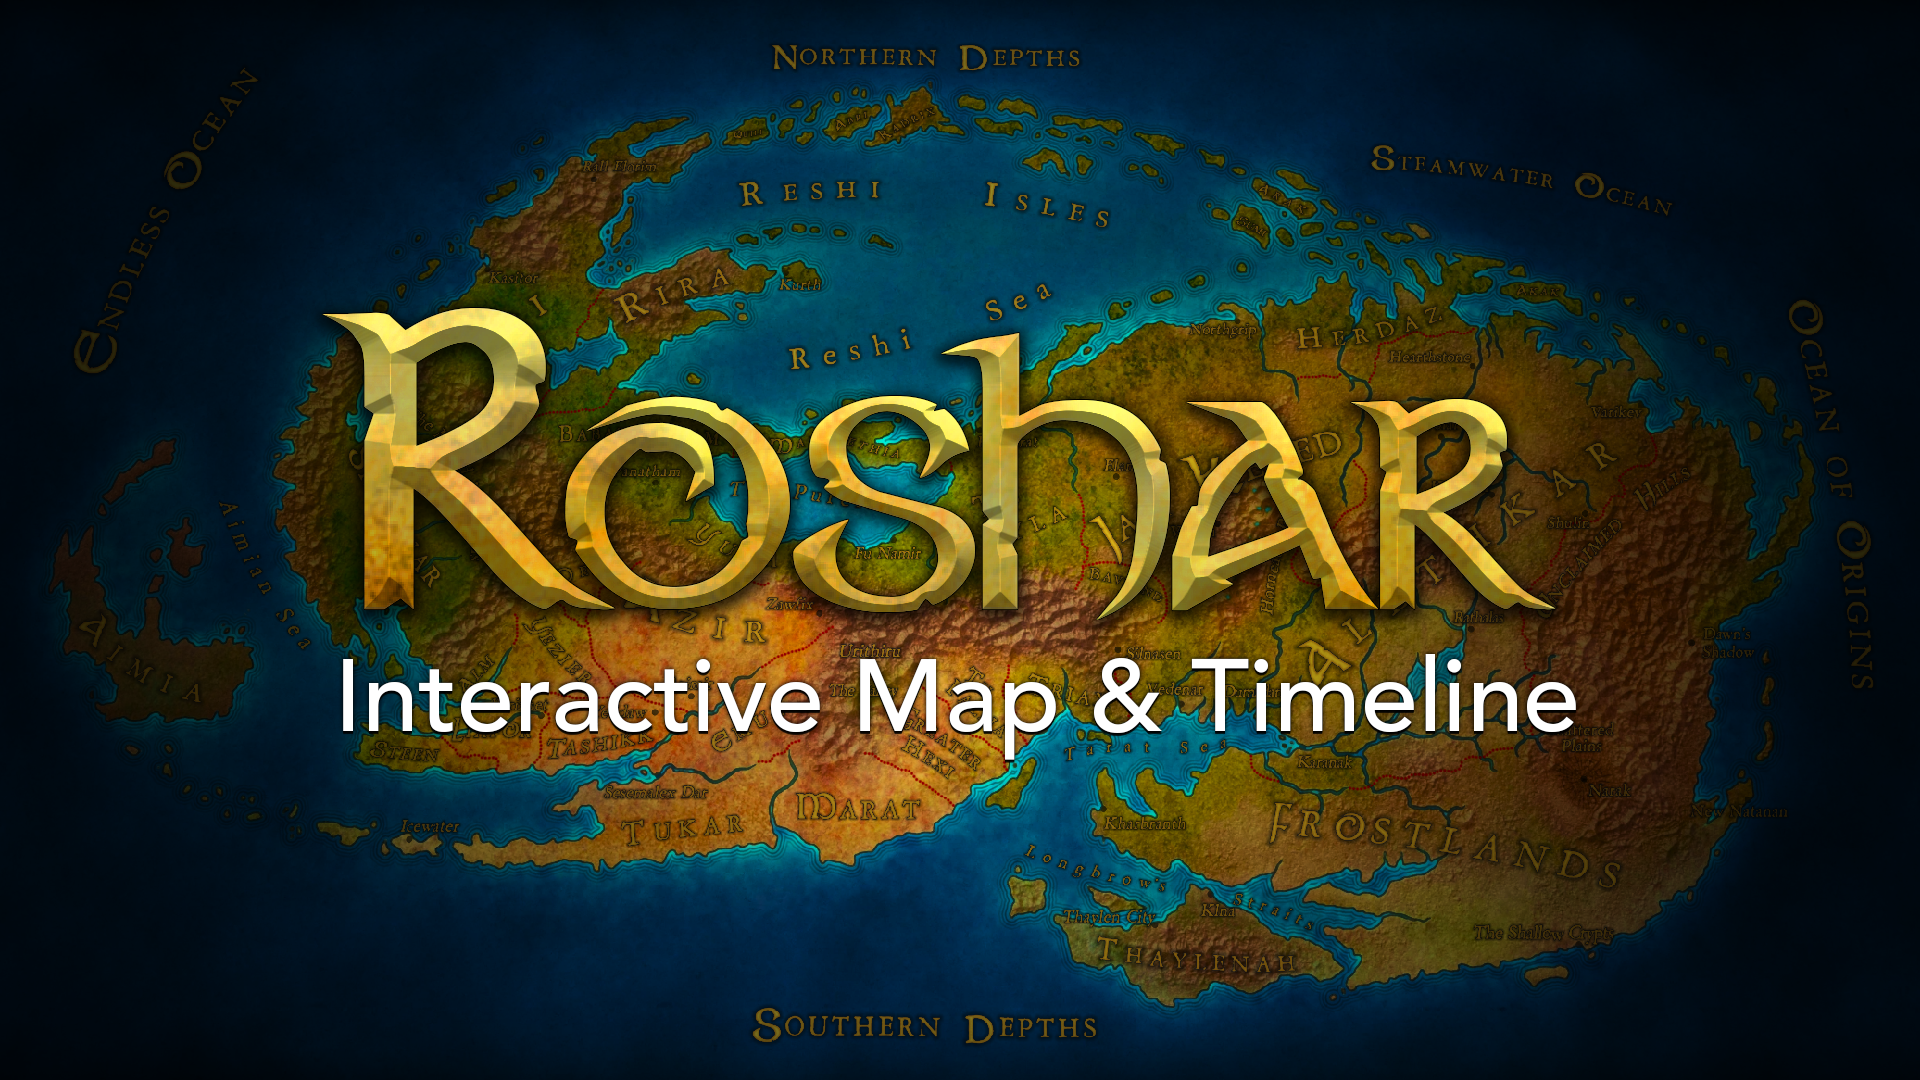 More information about "Update to the Interactive Map & Timeline of Roshar"